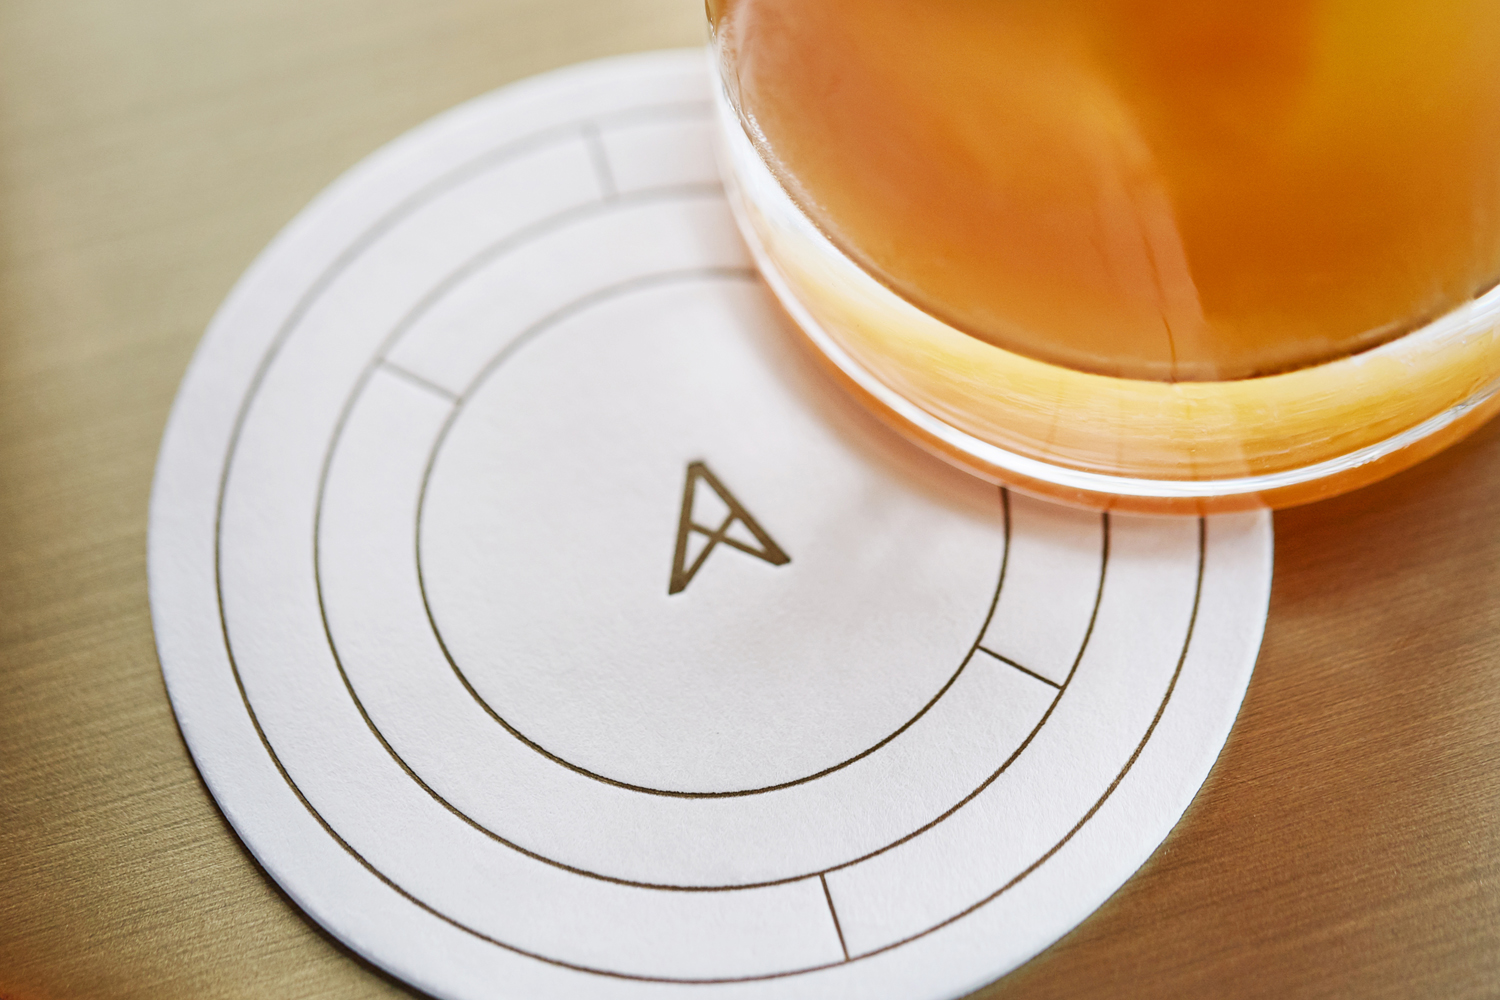 Brand identity and coaster with copper ink detail for Los Angeles restaurant Paley designed by Mucca, United States